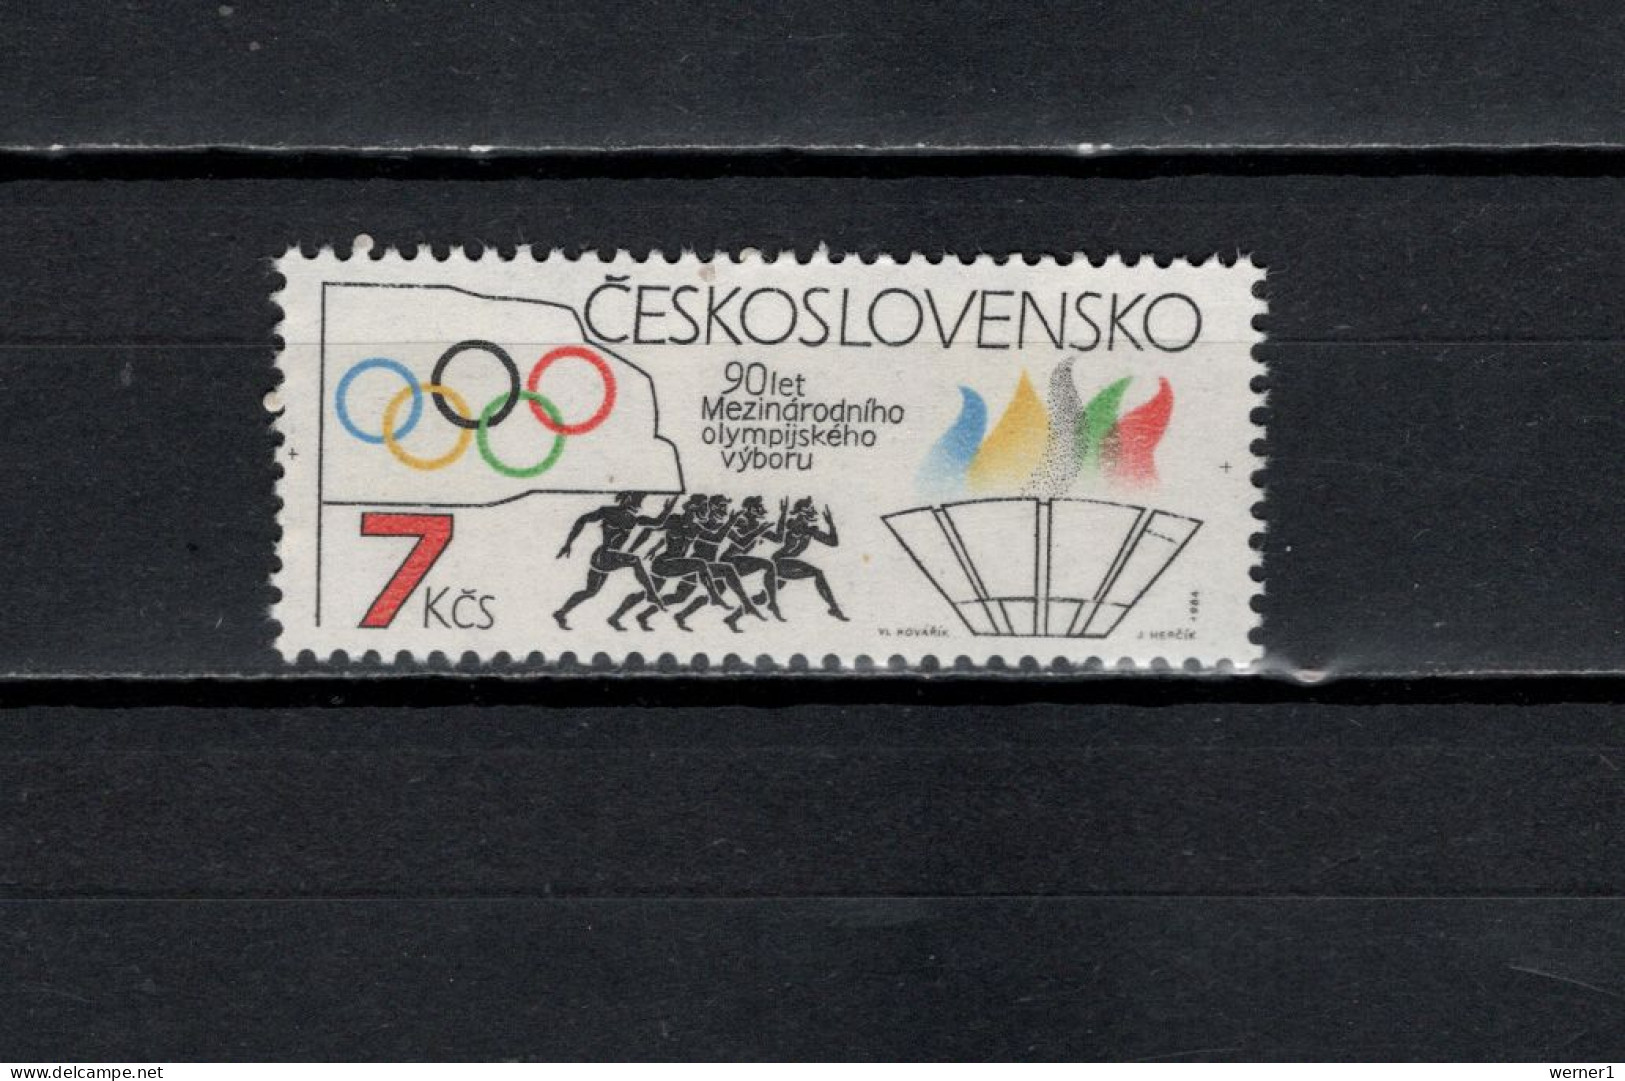 Czechoslovakia 1984 Olympic Games Stamp MNH - Sommer 1984: Los Angeles